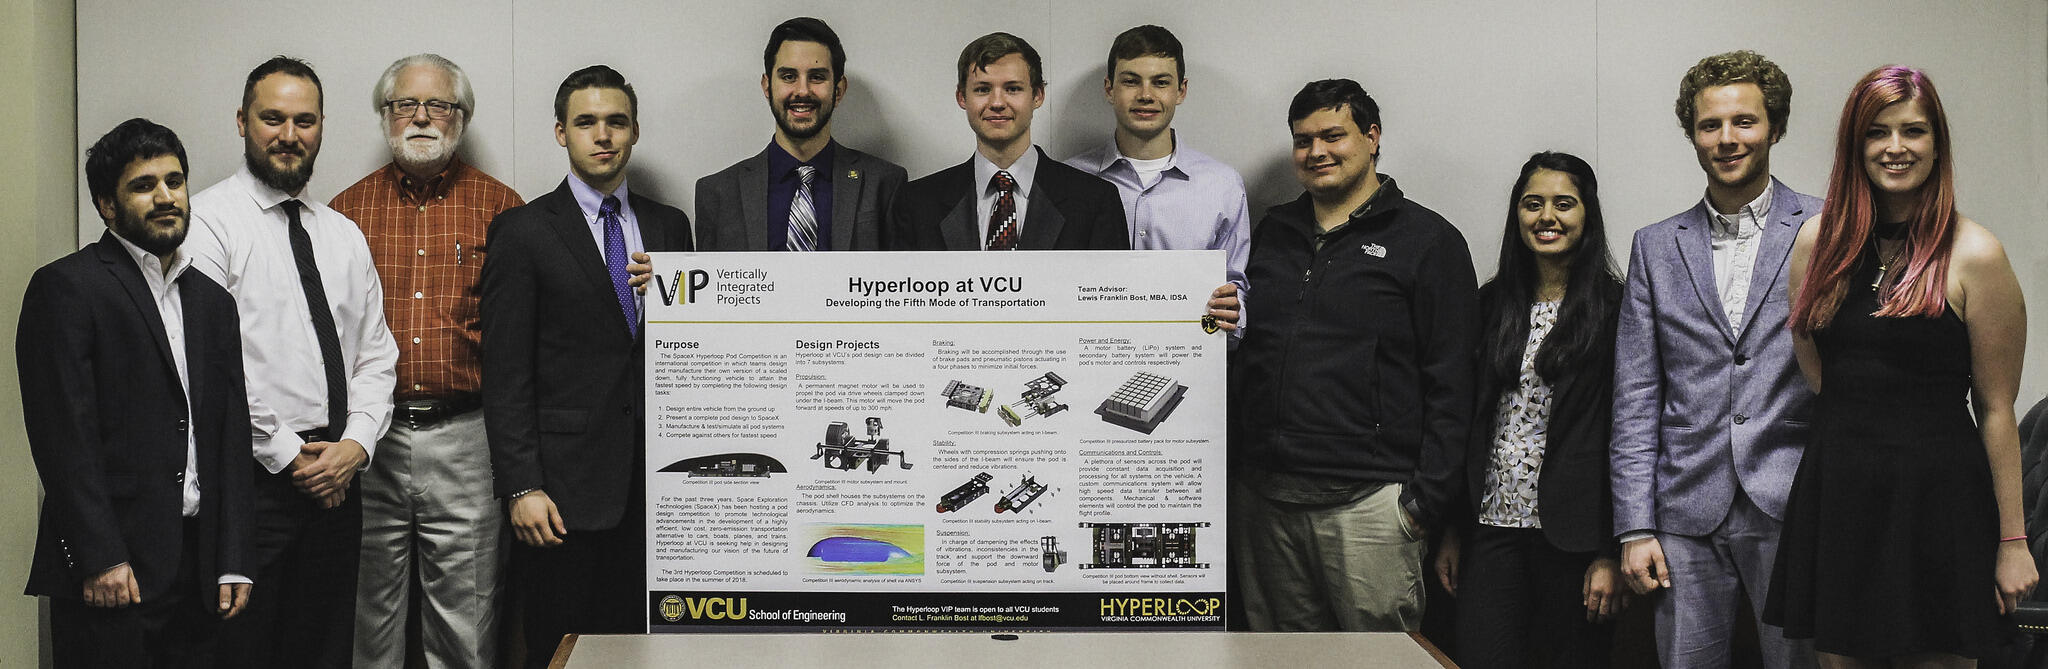 VCU team one of 20 selected internationally for 2018 SpaceX Hyperloop Pod Competition finals - VCU News - Virginia Commonwealth University